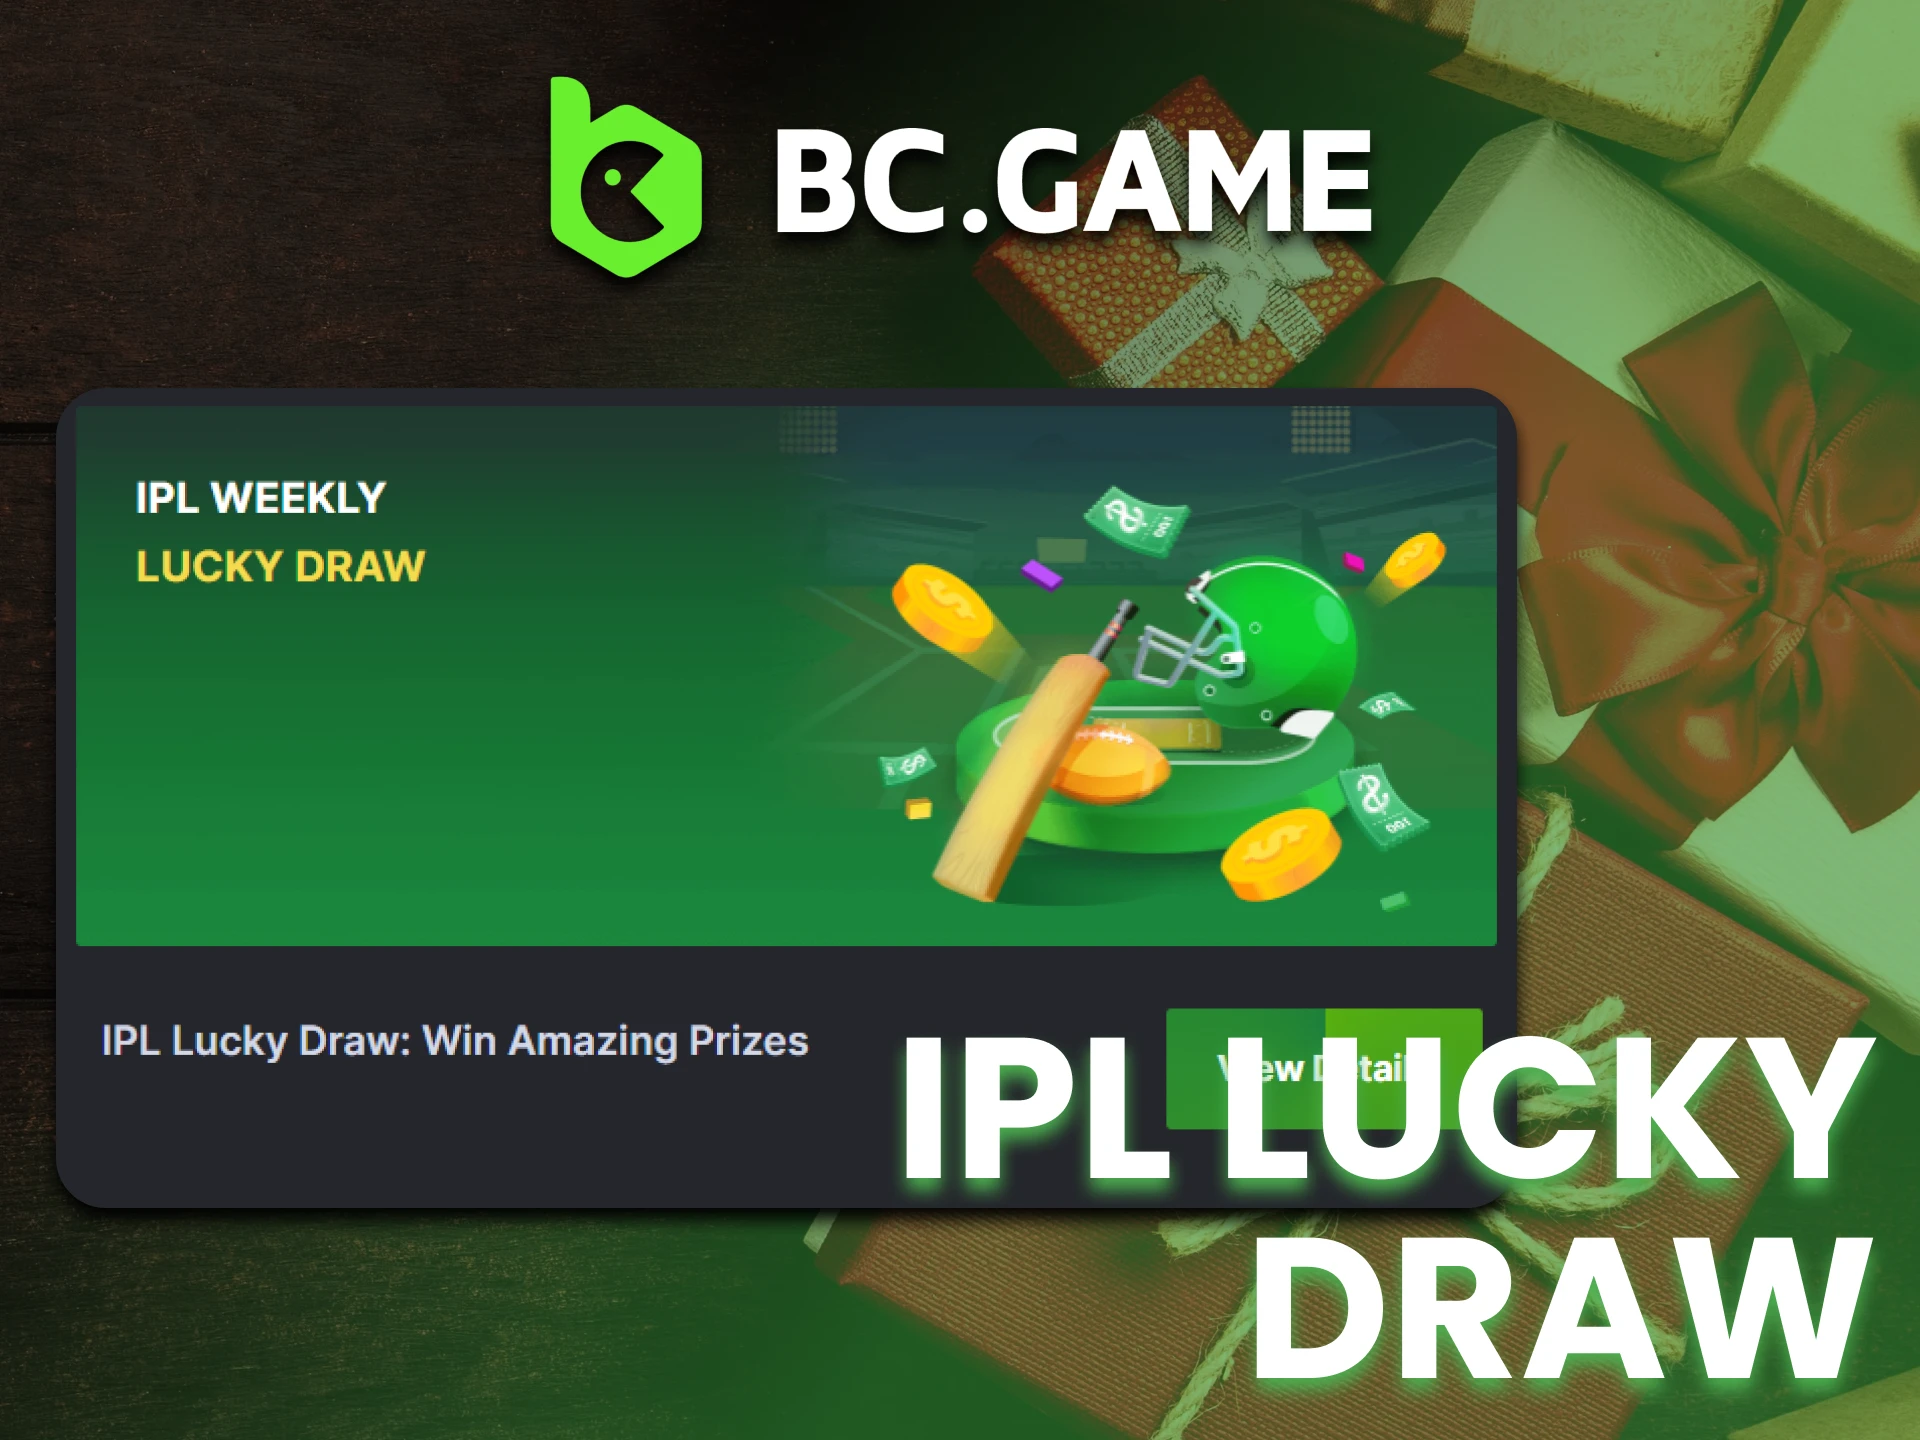 Make more money by making bets using IPL Lucky draw at BC Game.